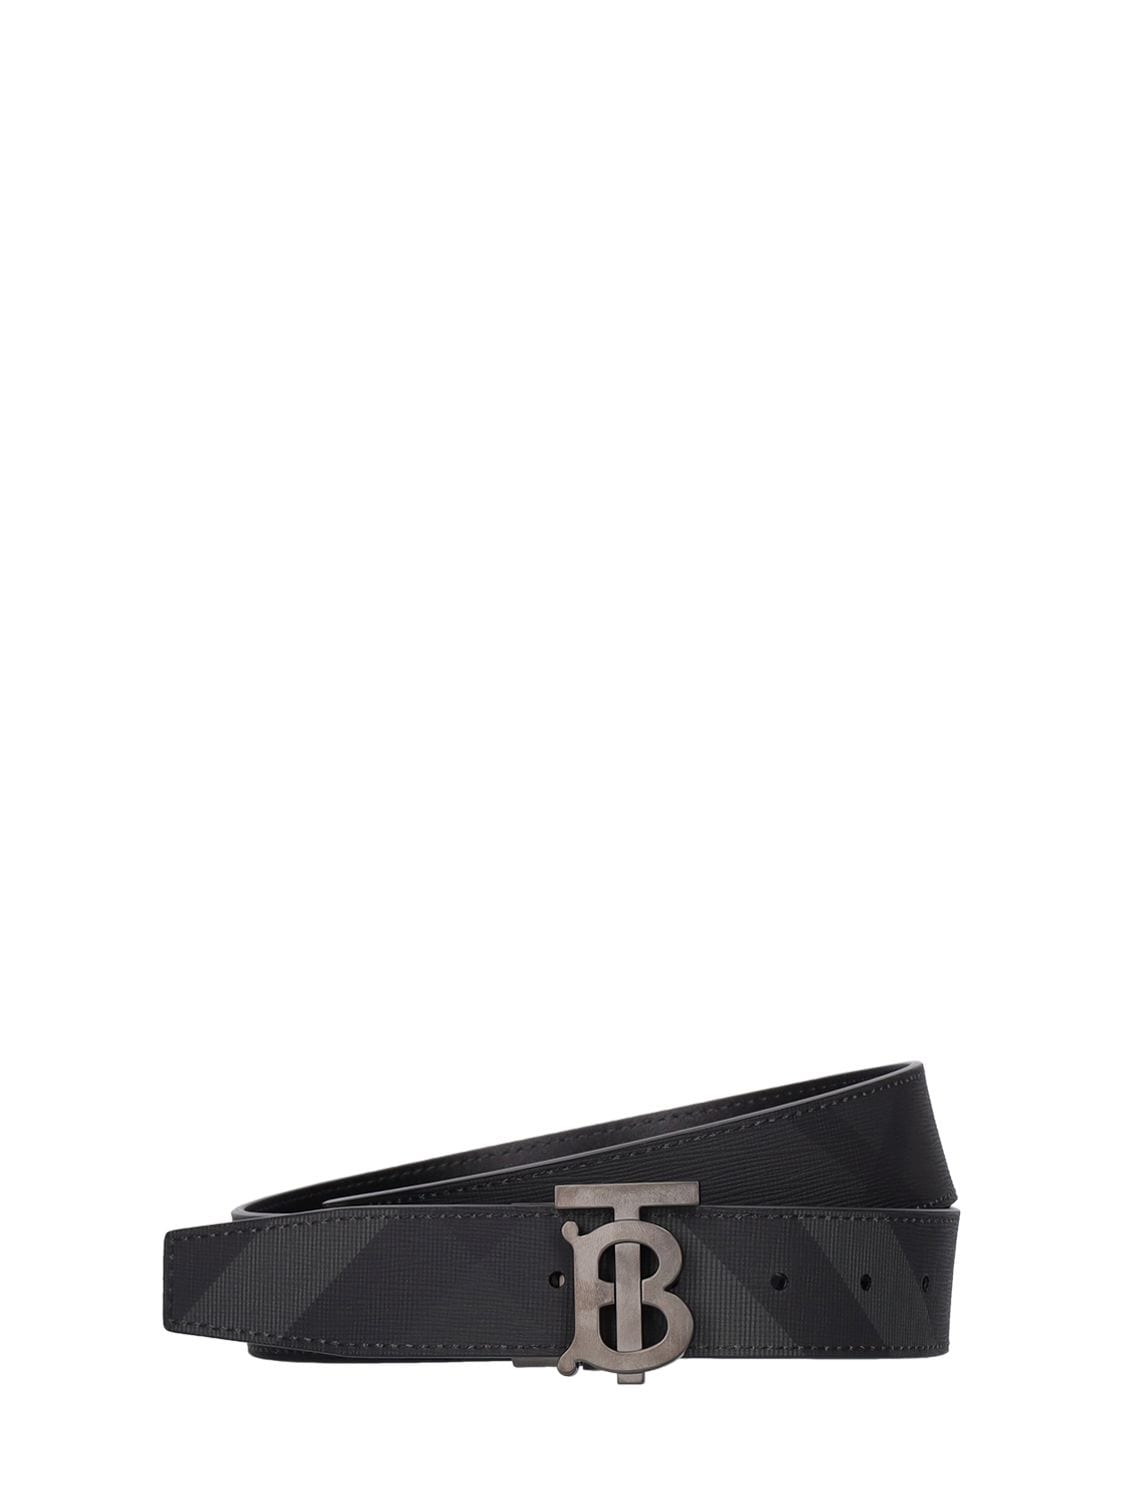 Burberry belts-B16522 - Click Image to Close